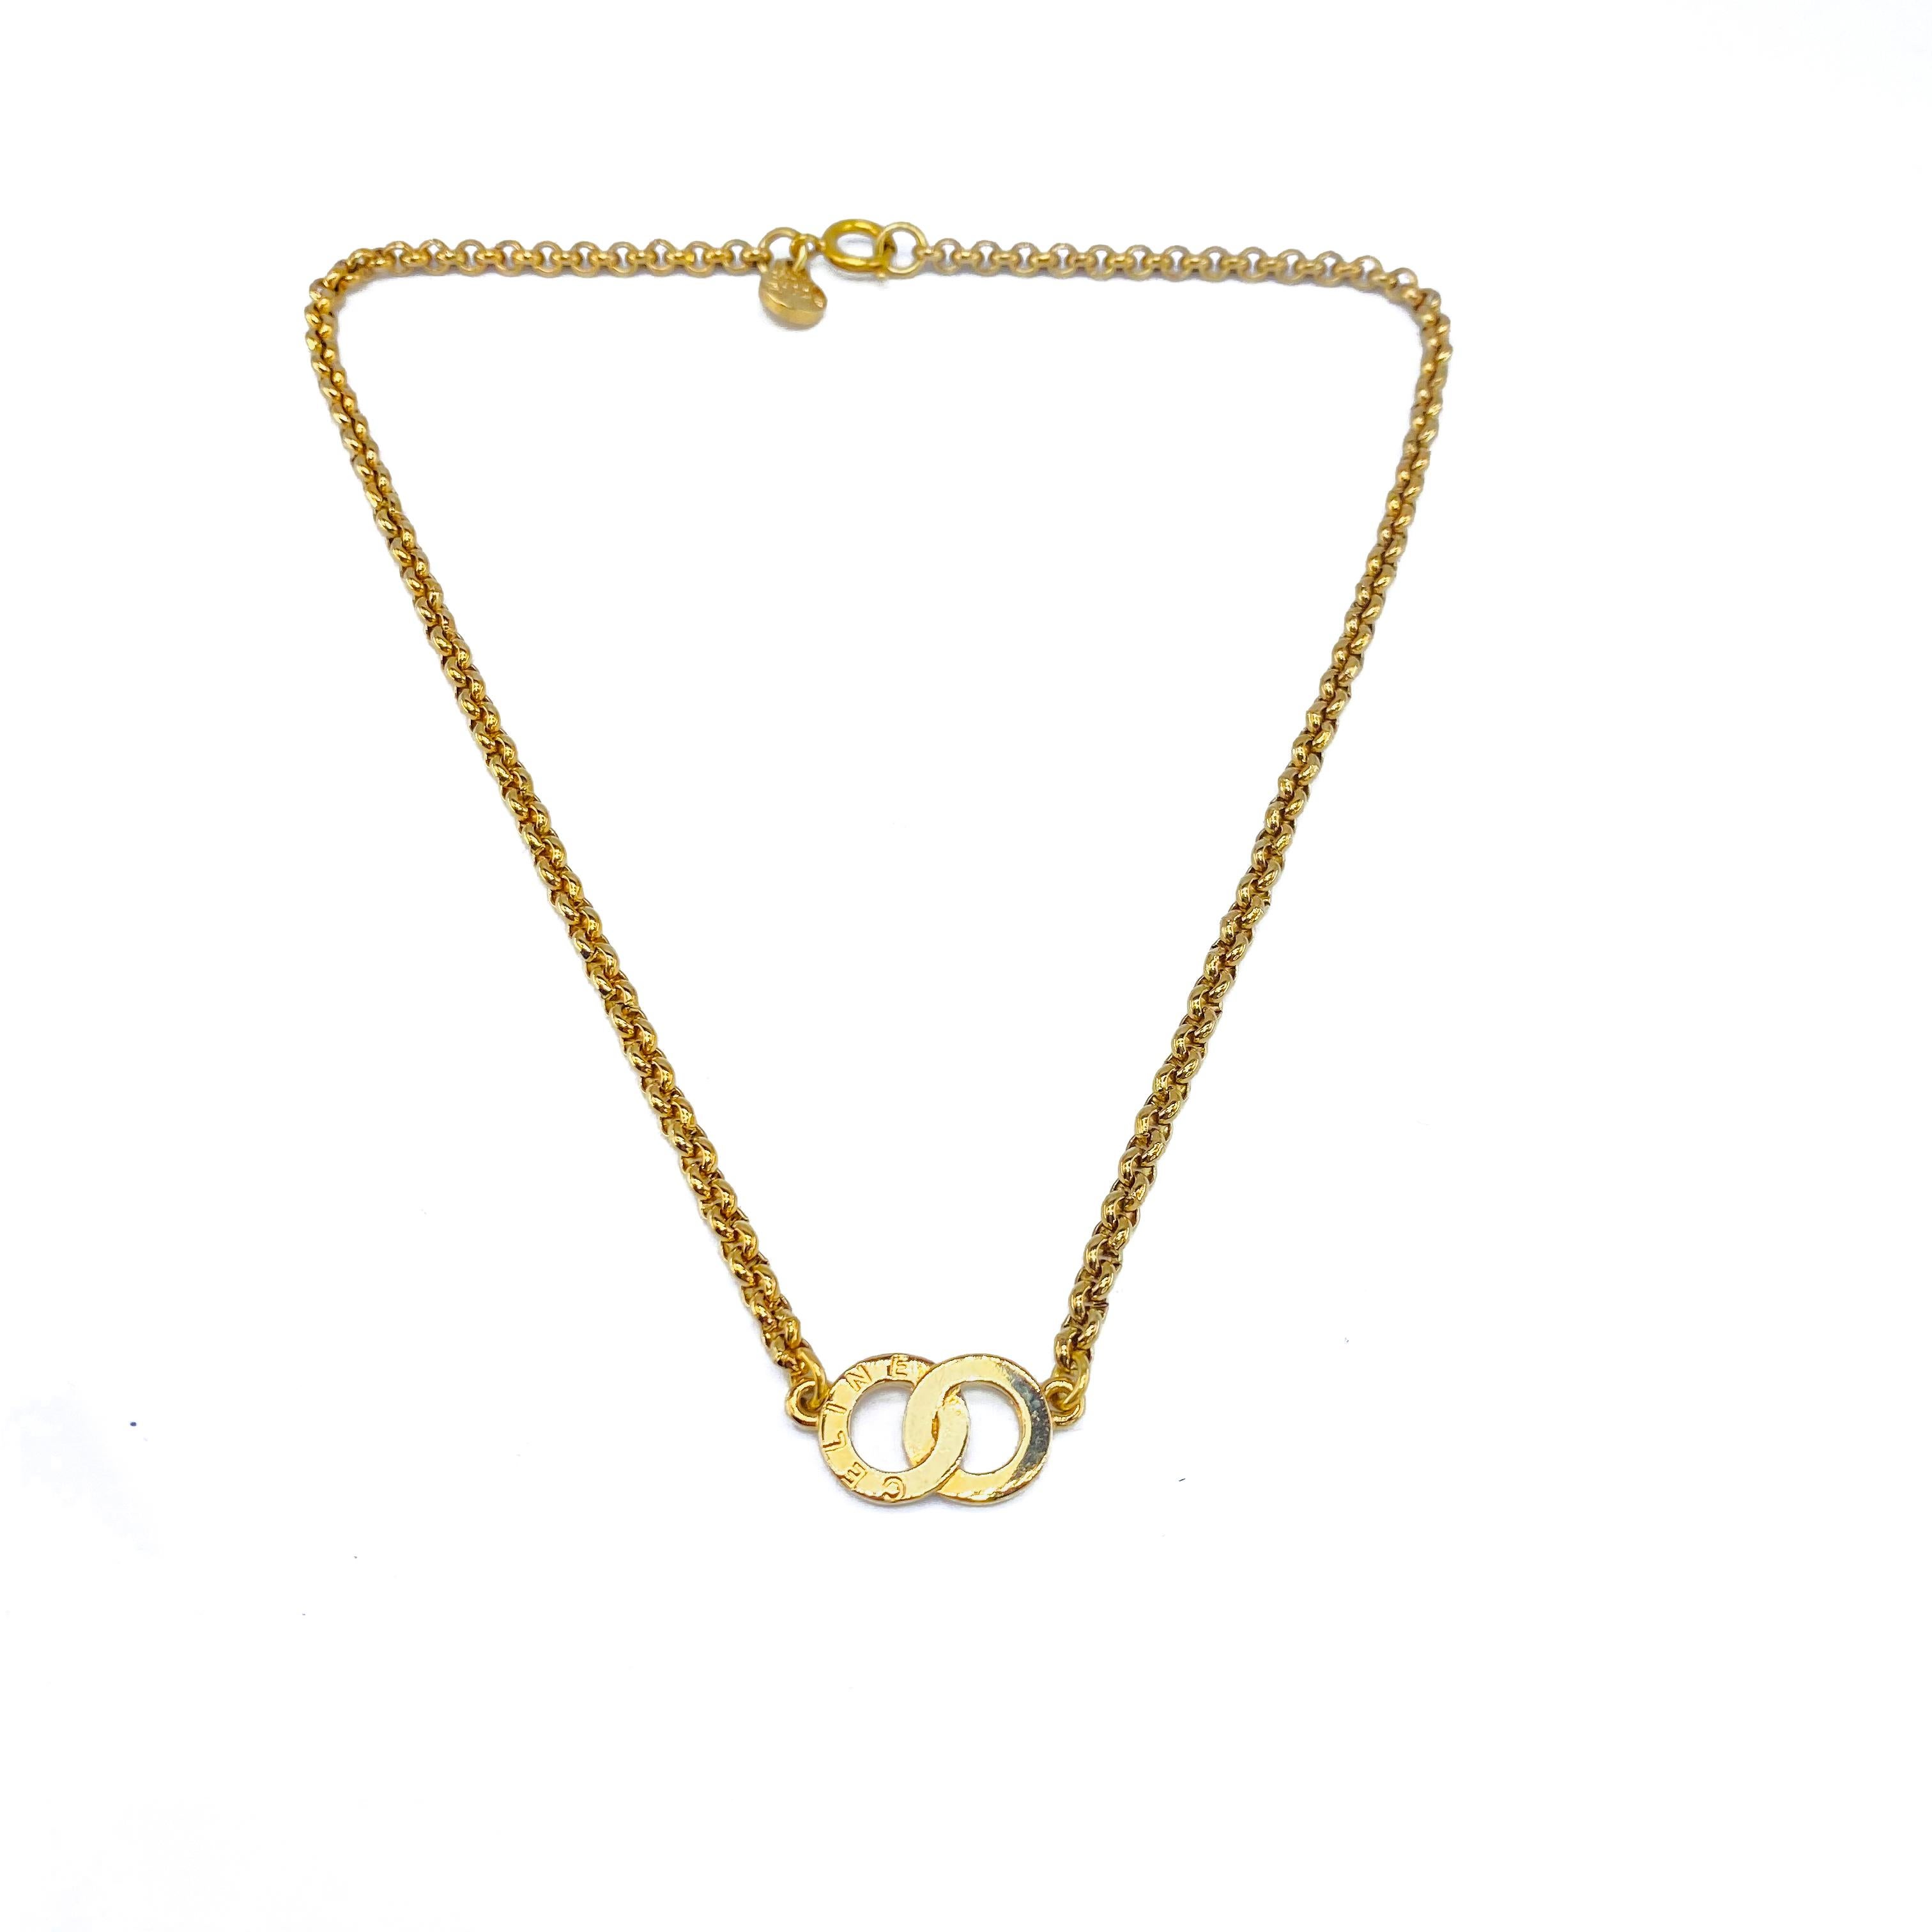 Celine Vintage 1990s Pendant Necklace

Timeless and versatile pendant from the 90s Celine archive

Detail
-Made in France in the 1990s
-Crafted from gold plated metal
-Small double loop pendant embossed with Celine
-Belcher chain

Size & Fit
-Length